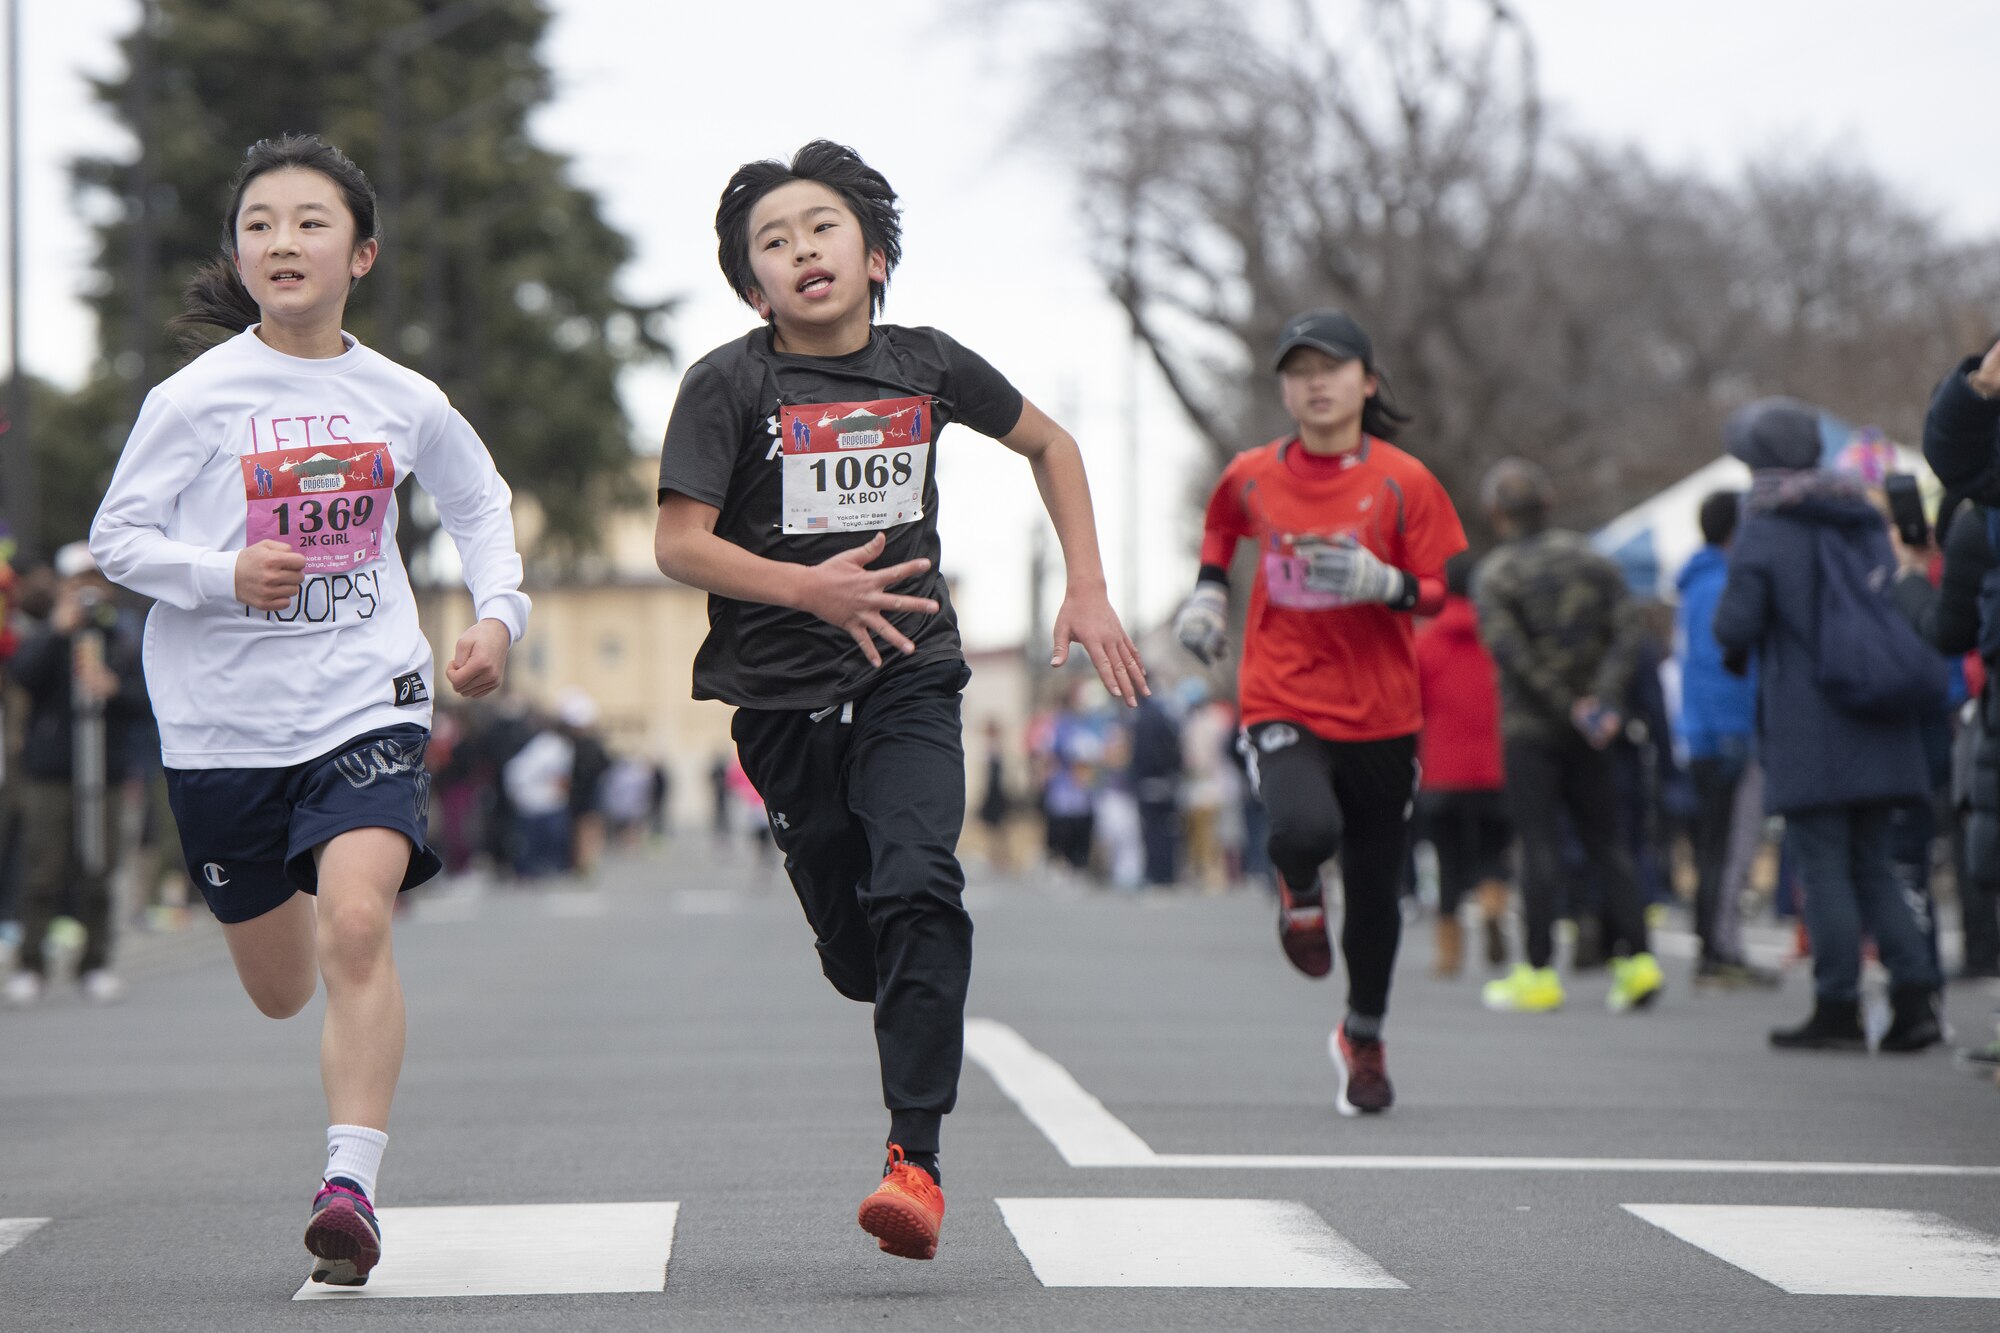 Children race toward the finish line during the 42nd annual Frostbite Road Race.